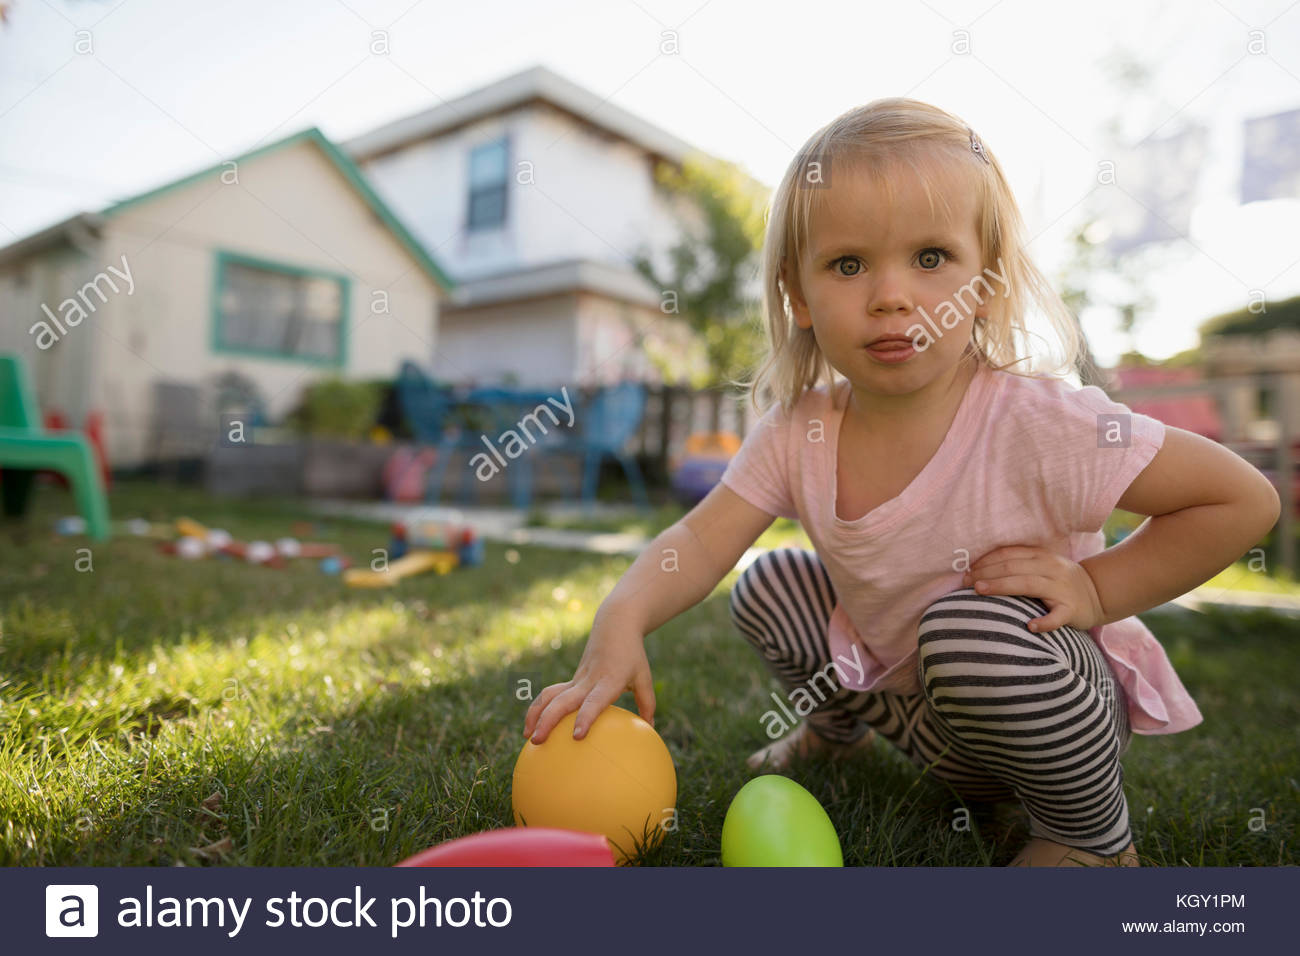 Curieux Portrait blonde girl Playing with toys in backyard Banque D'Images